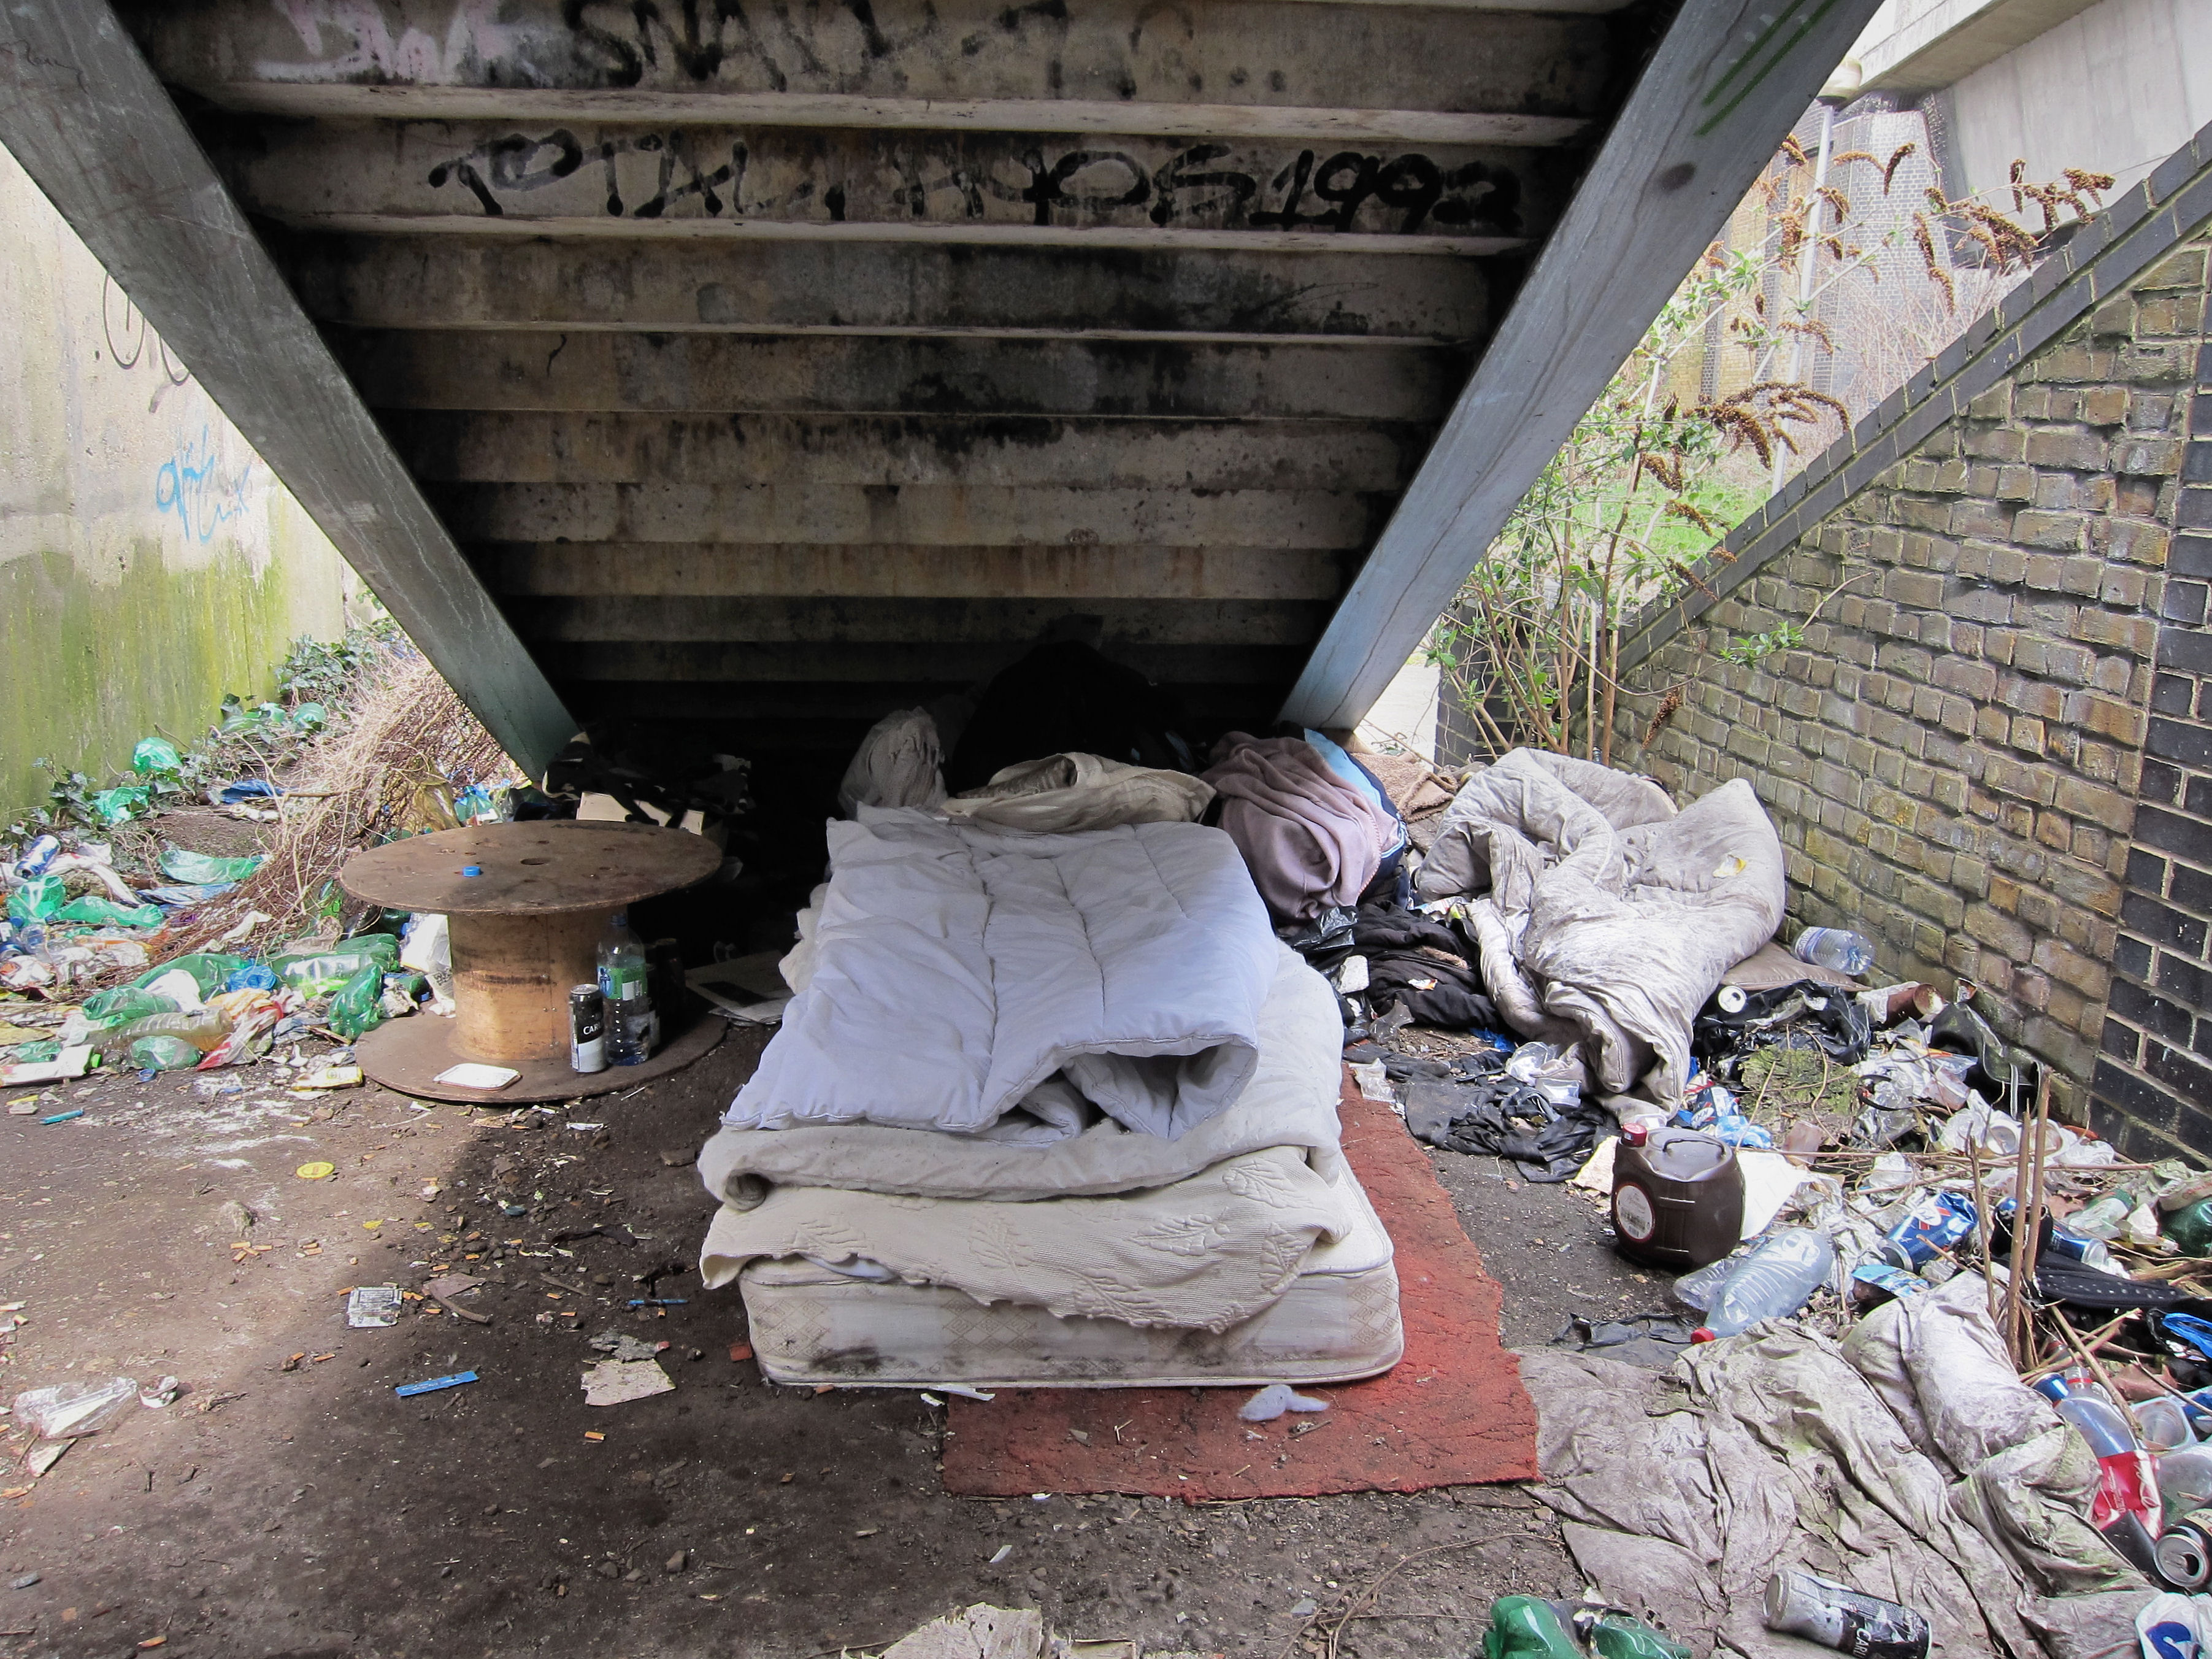 Rough sleepers set up camp in Tottenham, London. © Alan Stanton, Creative Commons